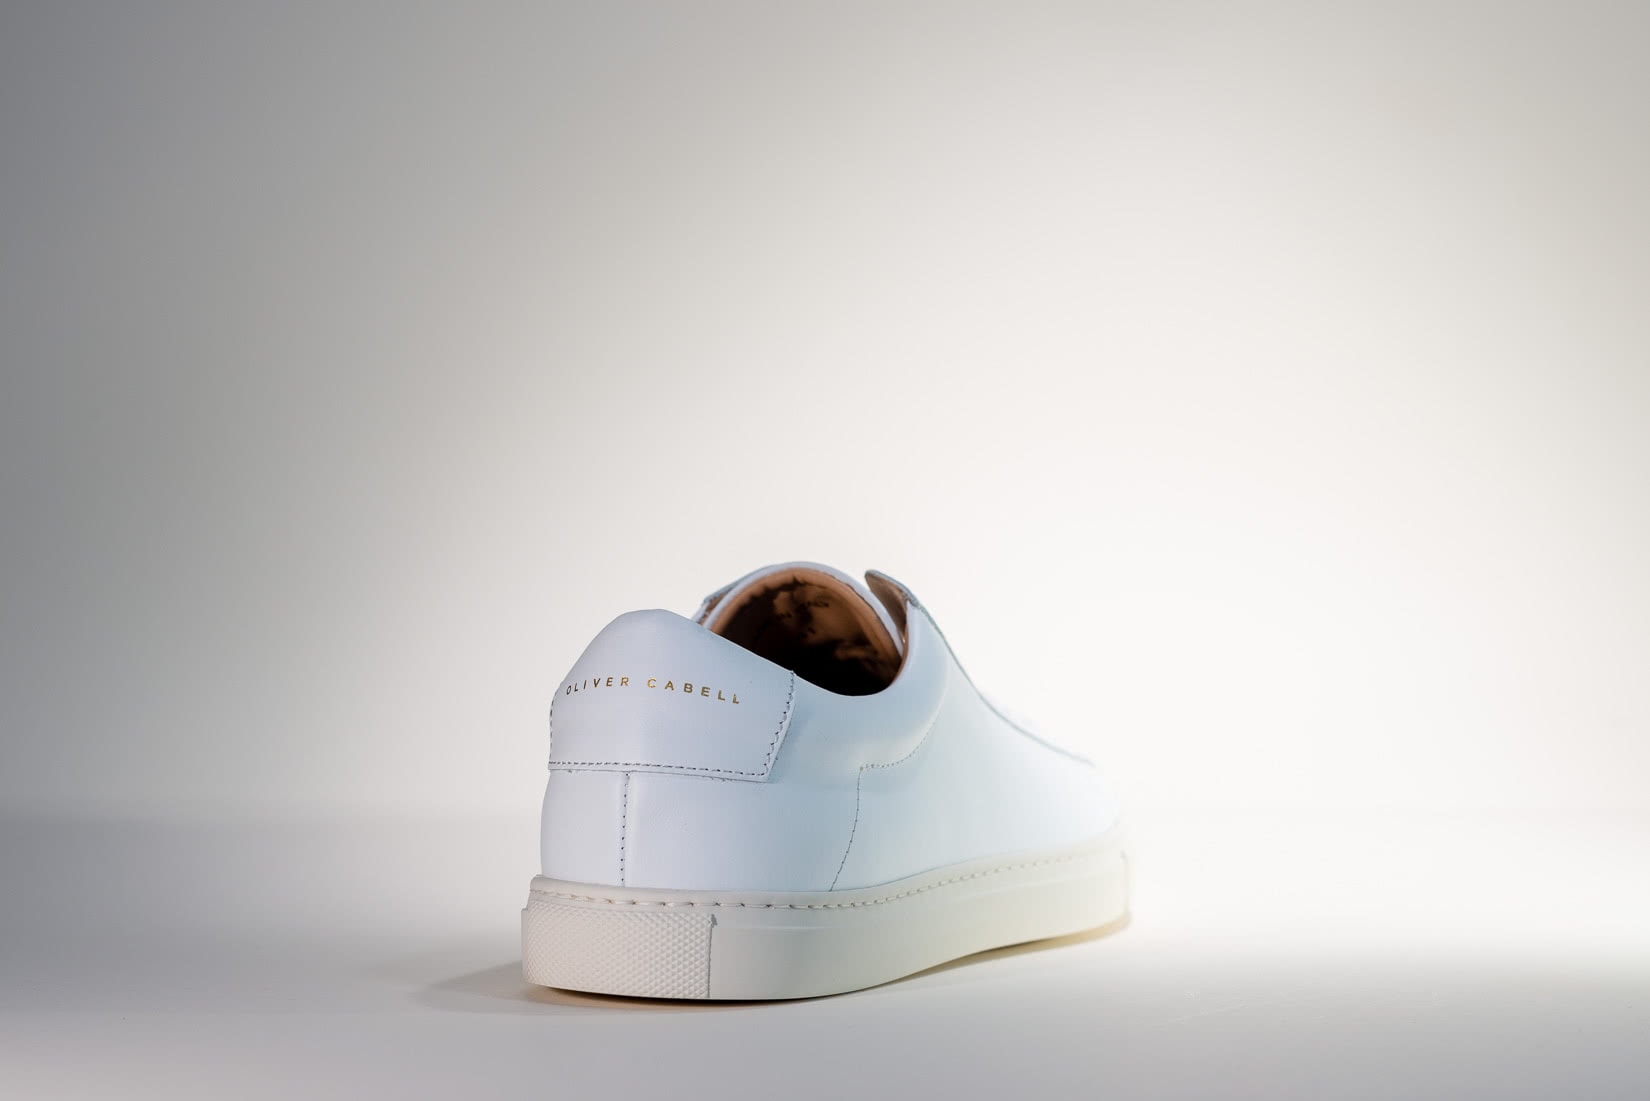 oliver cabell review low 1 sneakers luxury - Luxe Digital